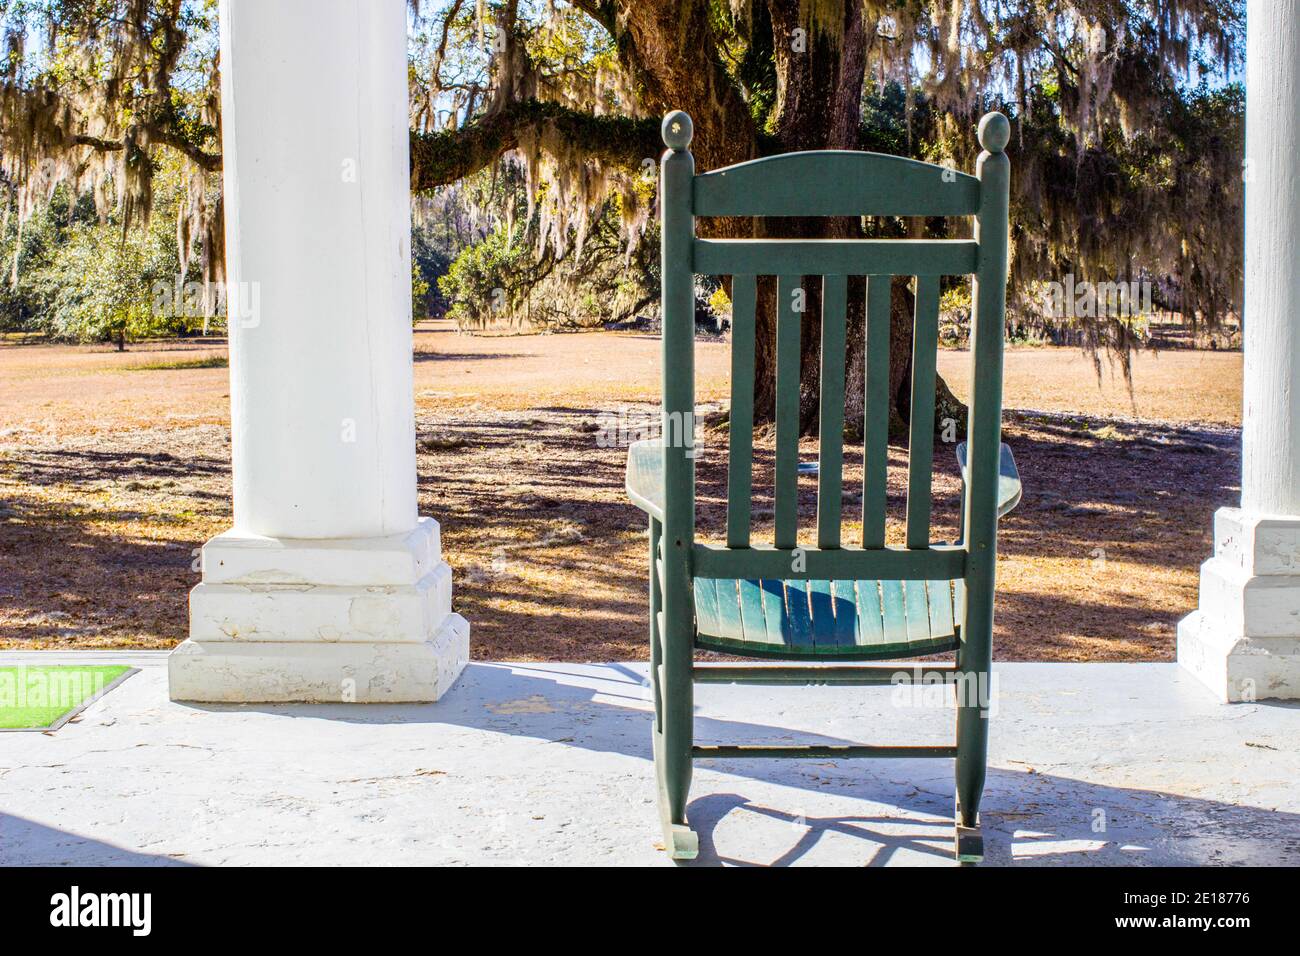 Single empty rocking chair on the front porch of an antebellum style house in the southern United States. Stock Photo